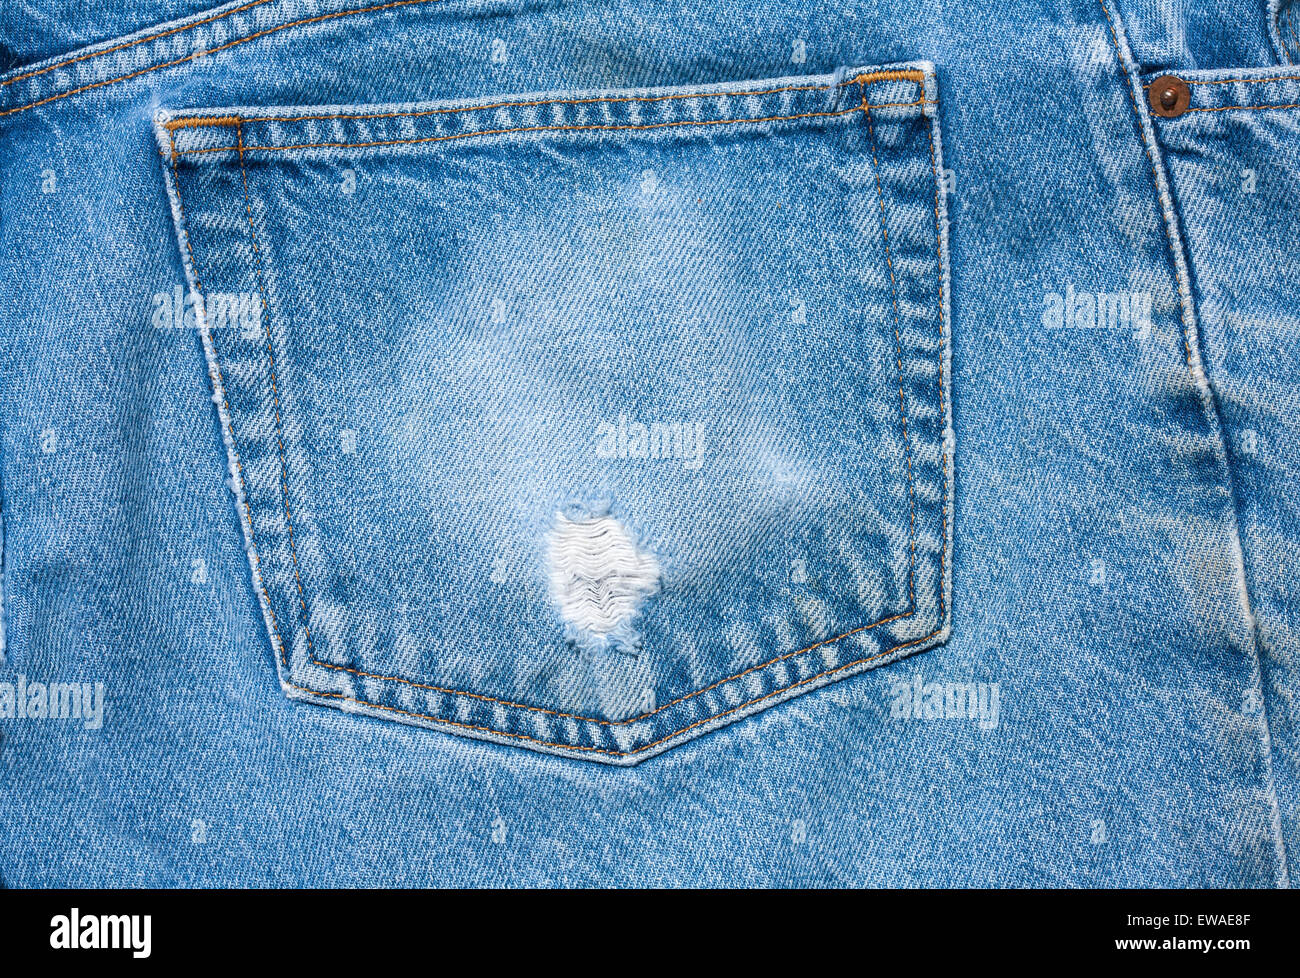 Old Worn Jeans. Stock Photo